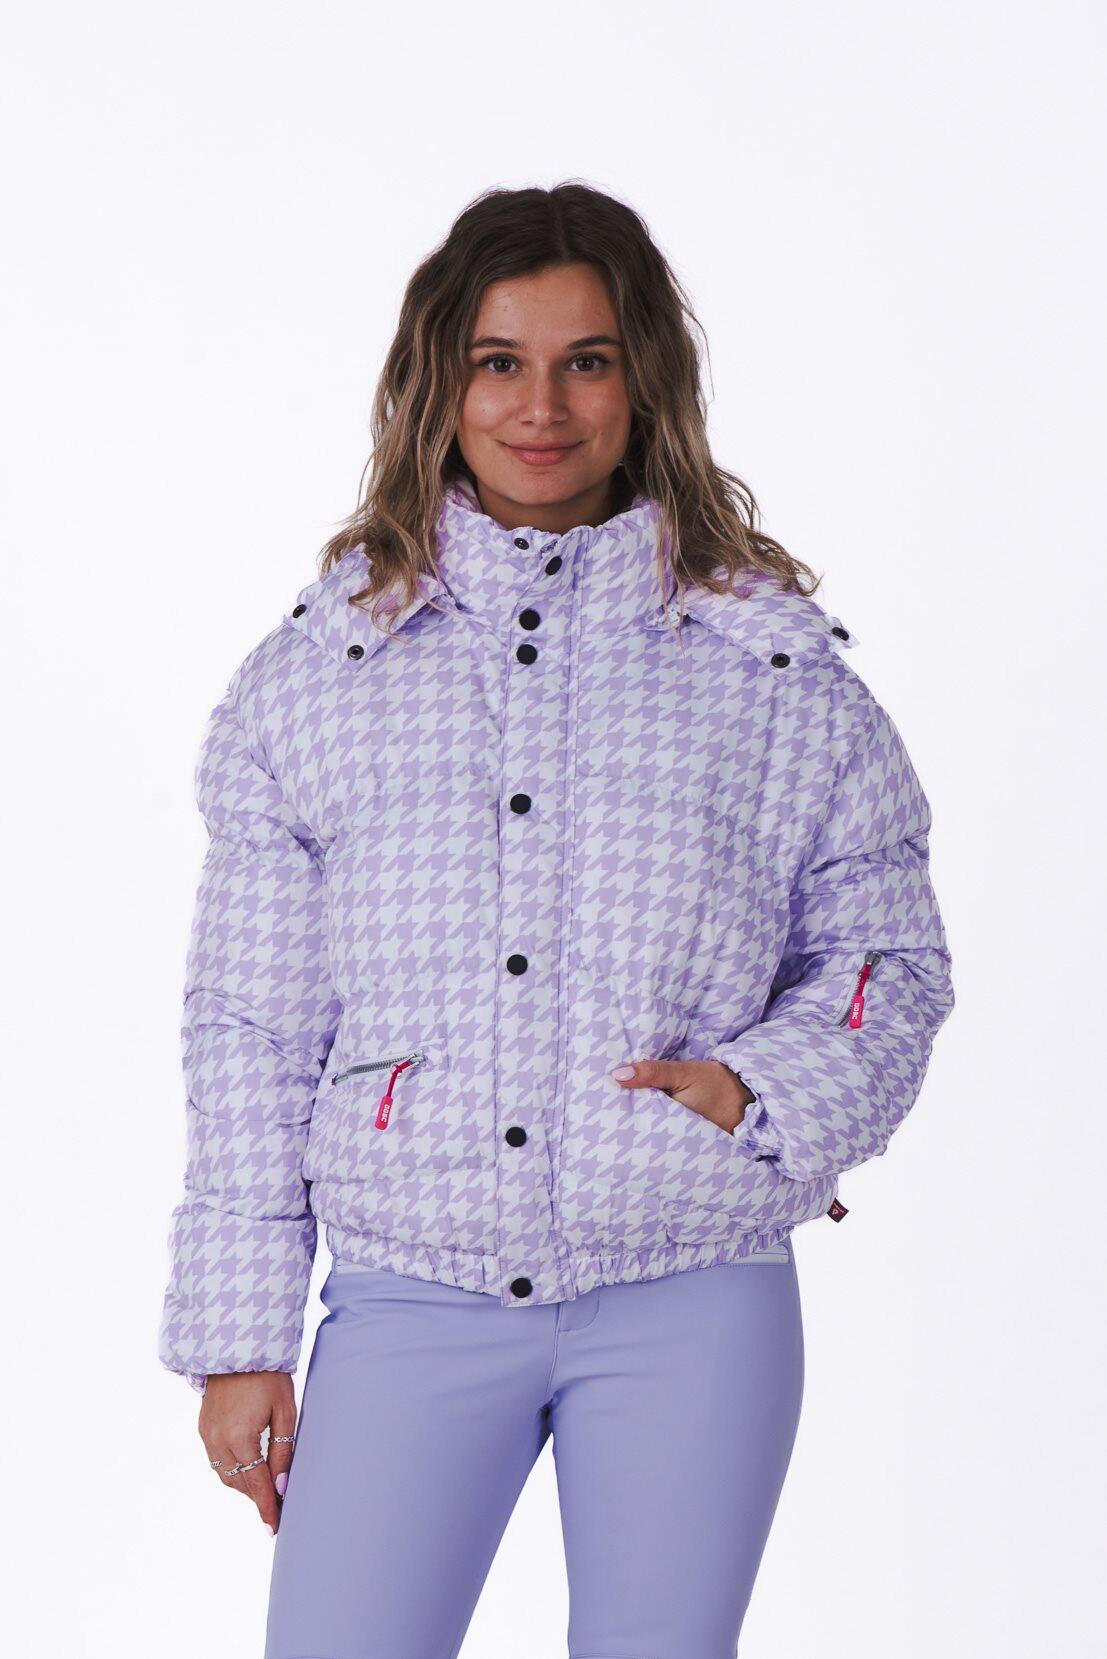 OOSC Purple Houndstooth Chic Puffer Jacket